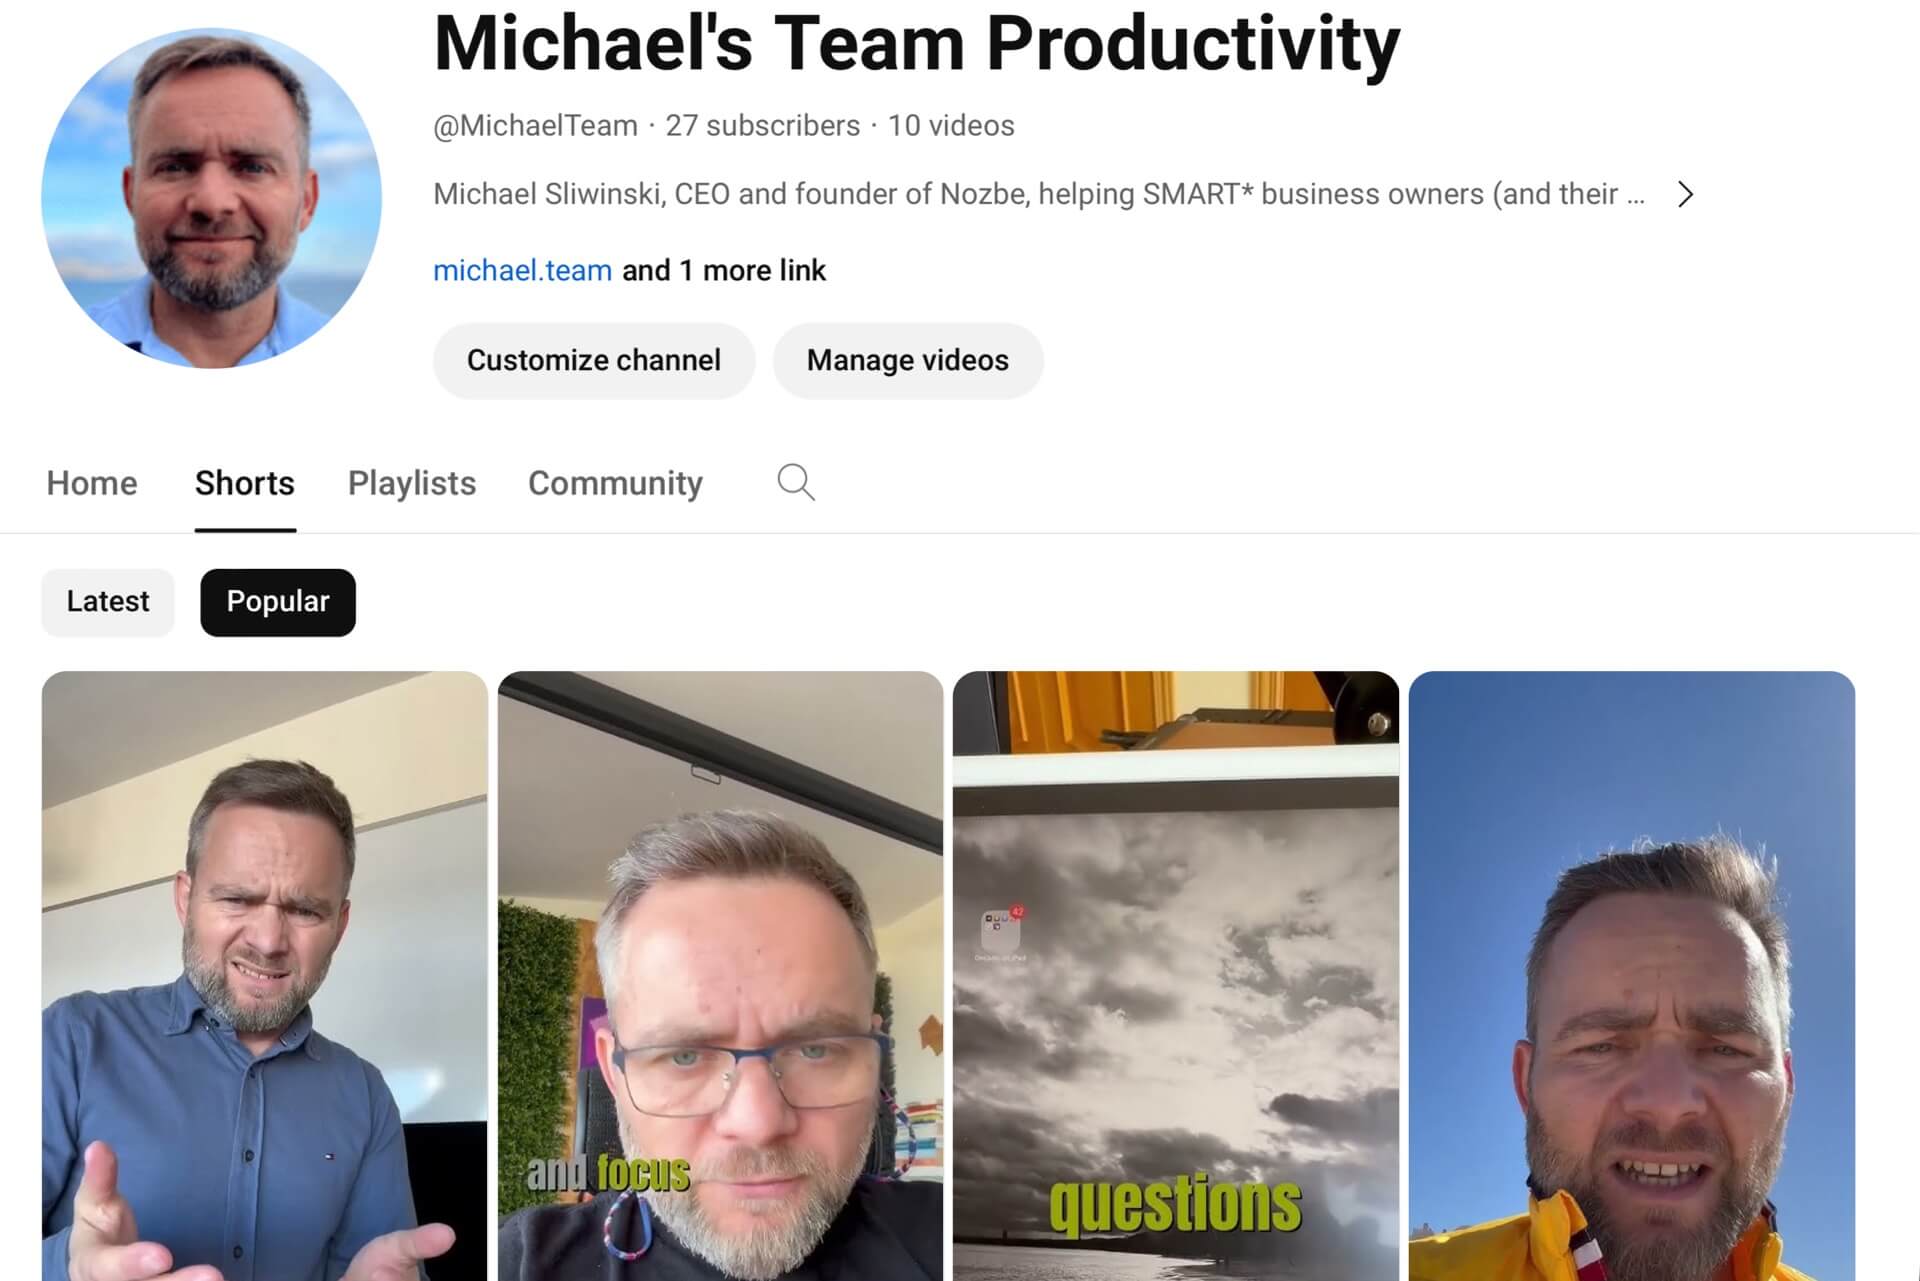 Subscribe to my new “Michael Team” YouTube Channel for daily productivity tips and tricks - my first 10 videos!